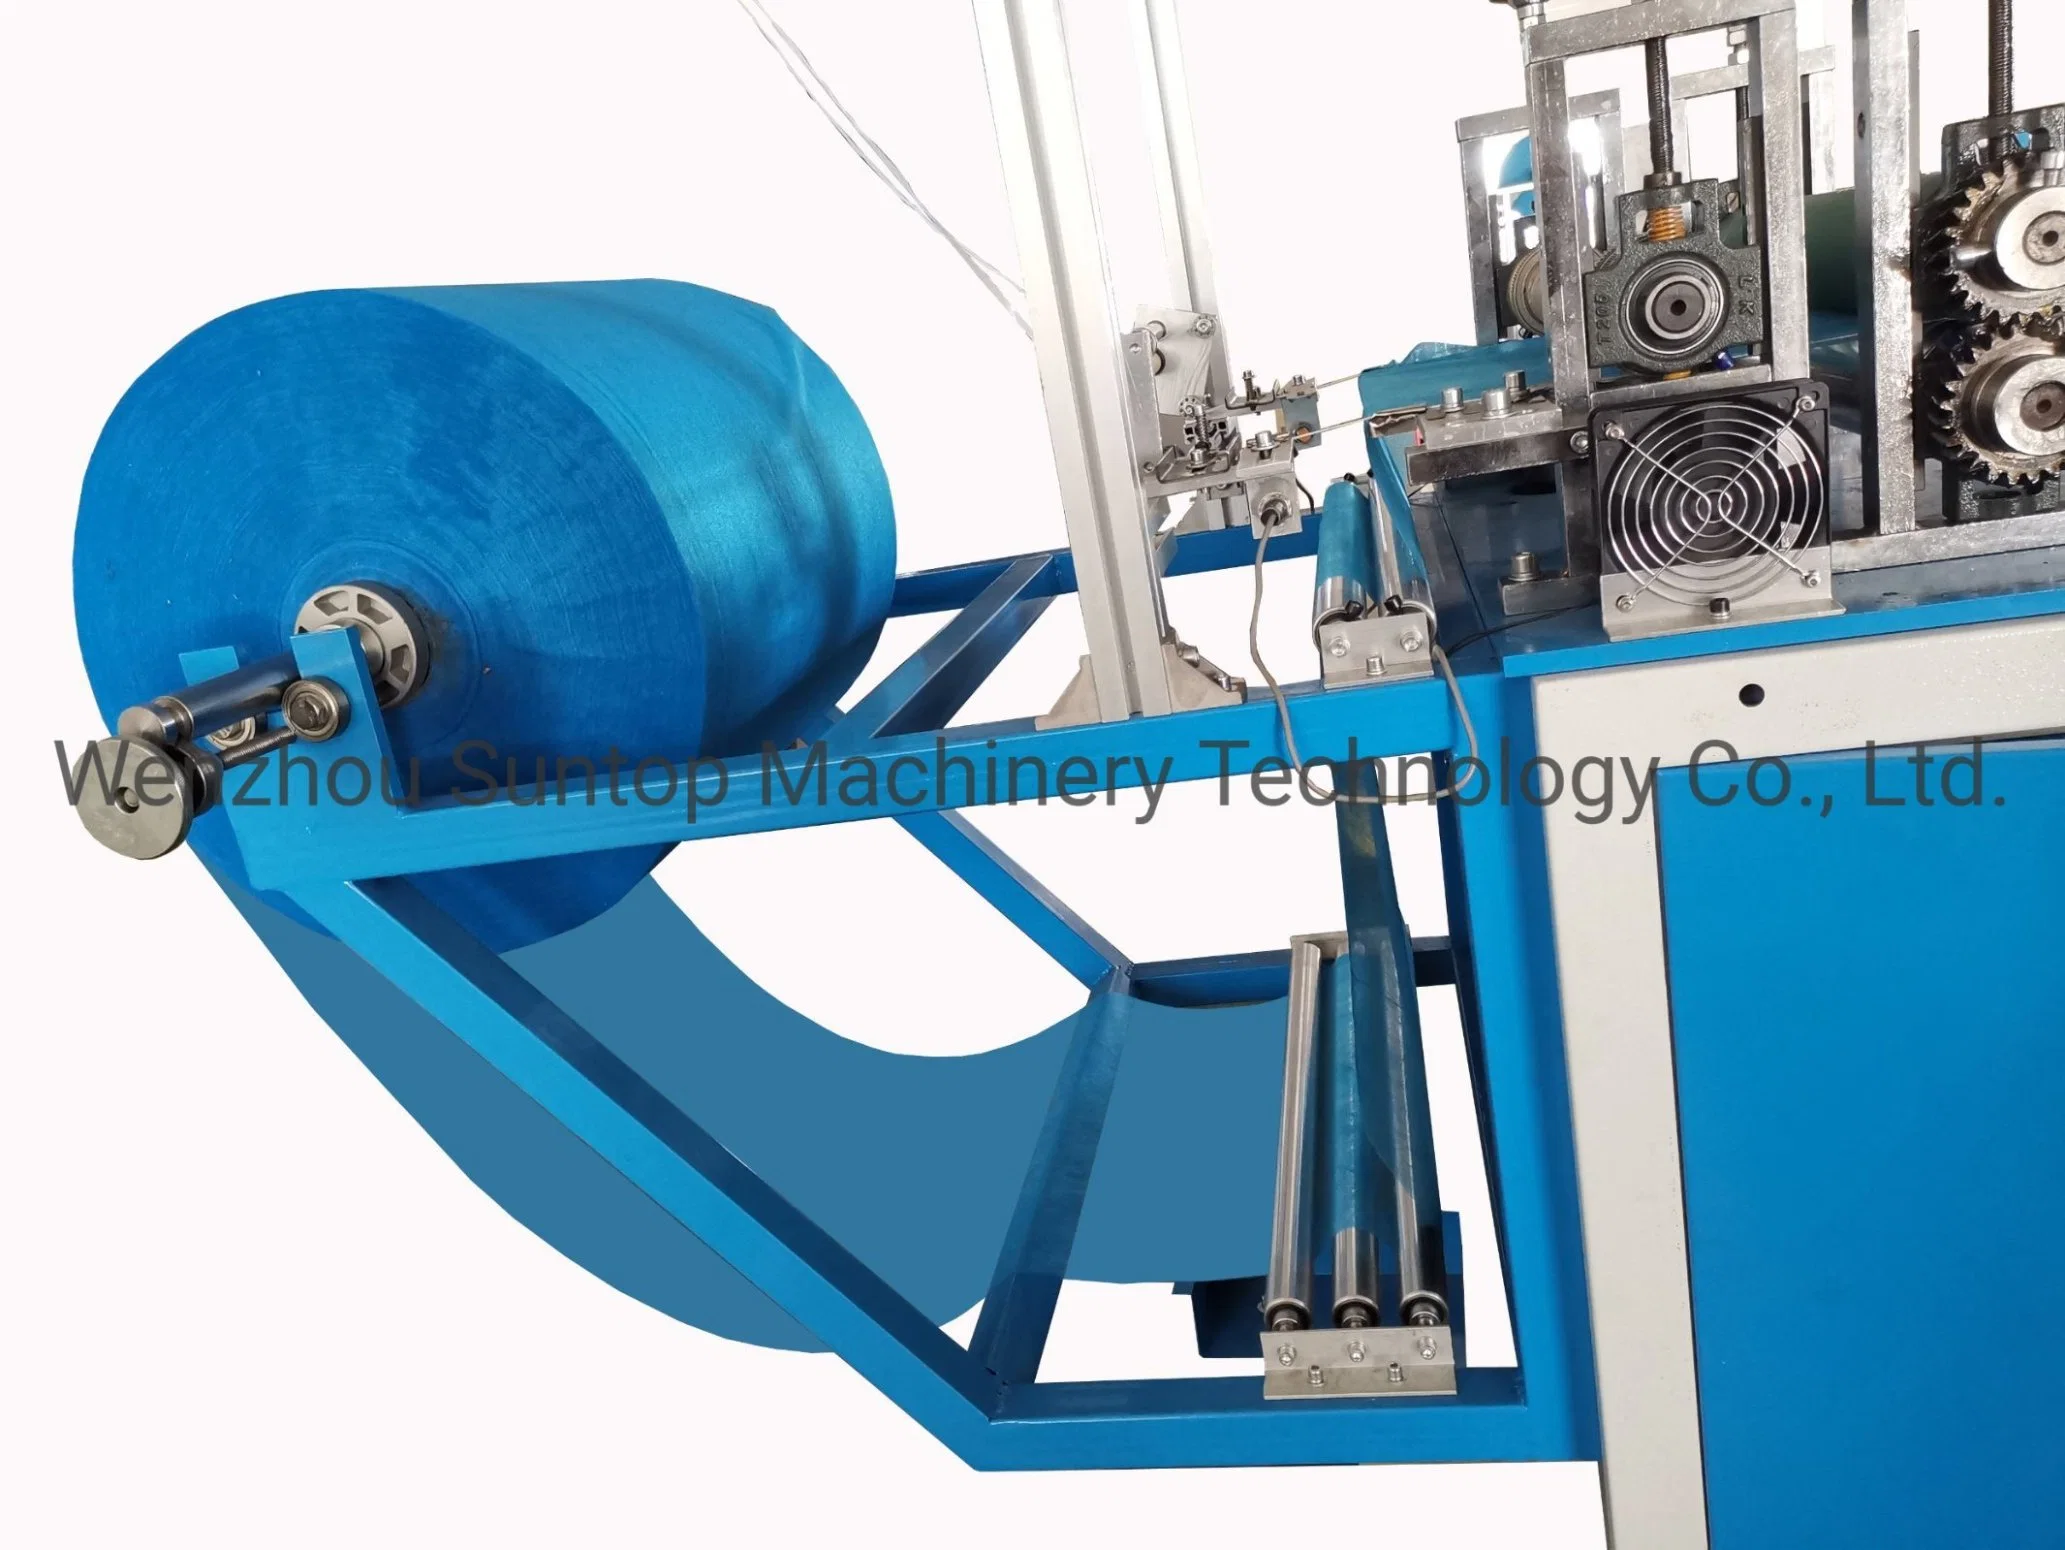 Full-Automatic Disposable Medical Supply Bouffant Cap Making Machine